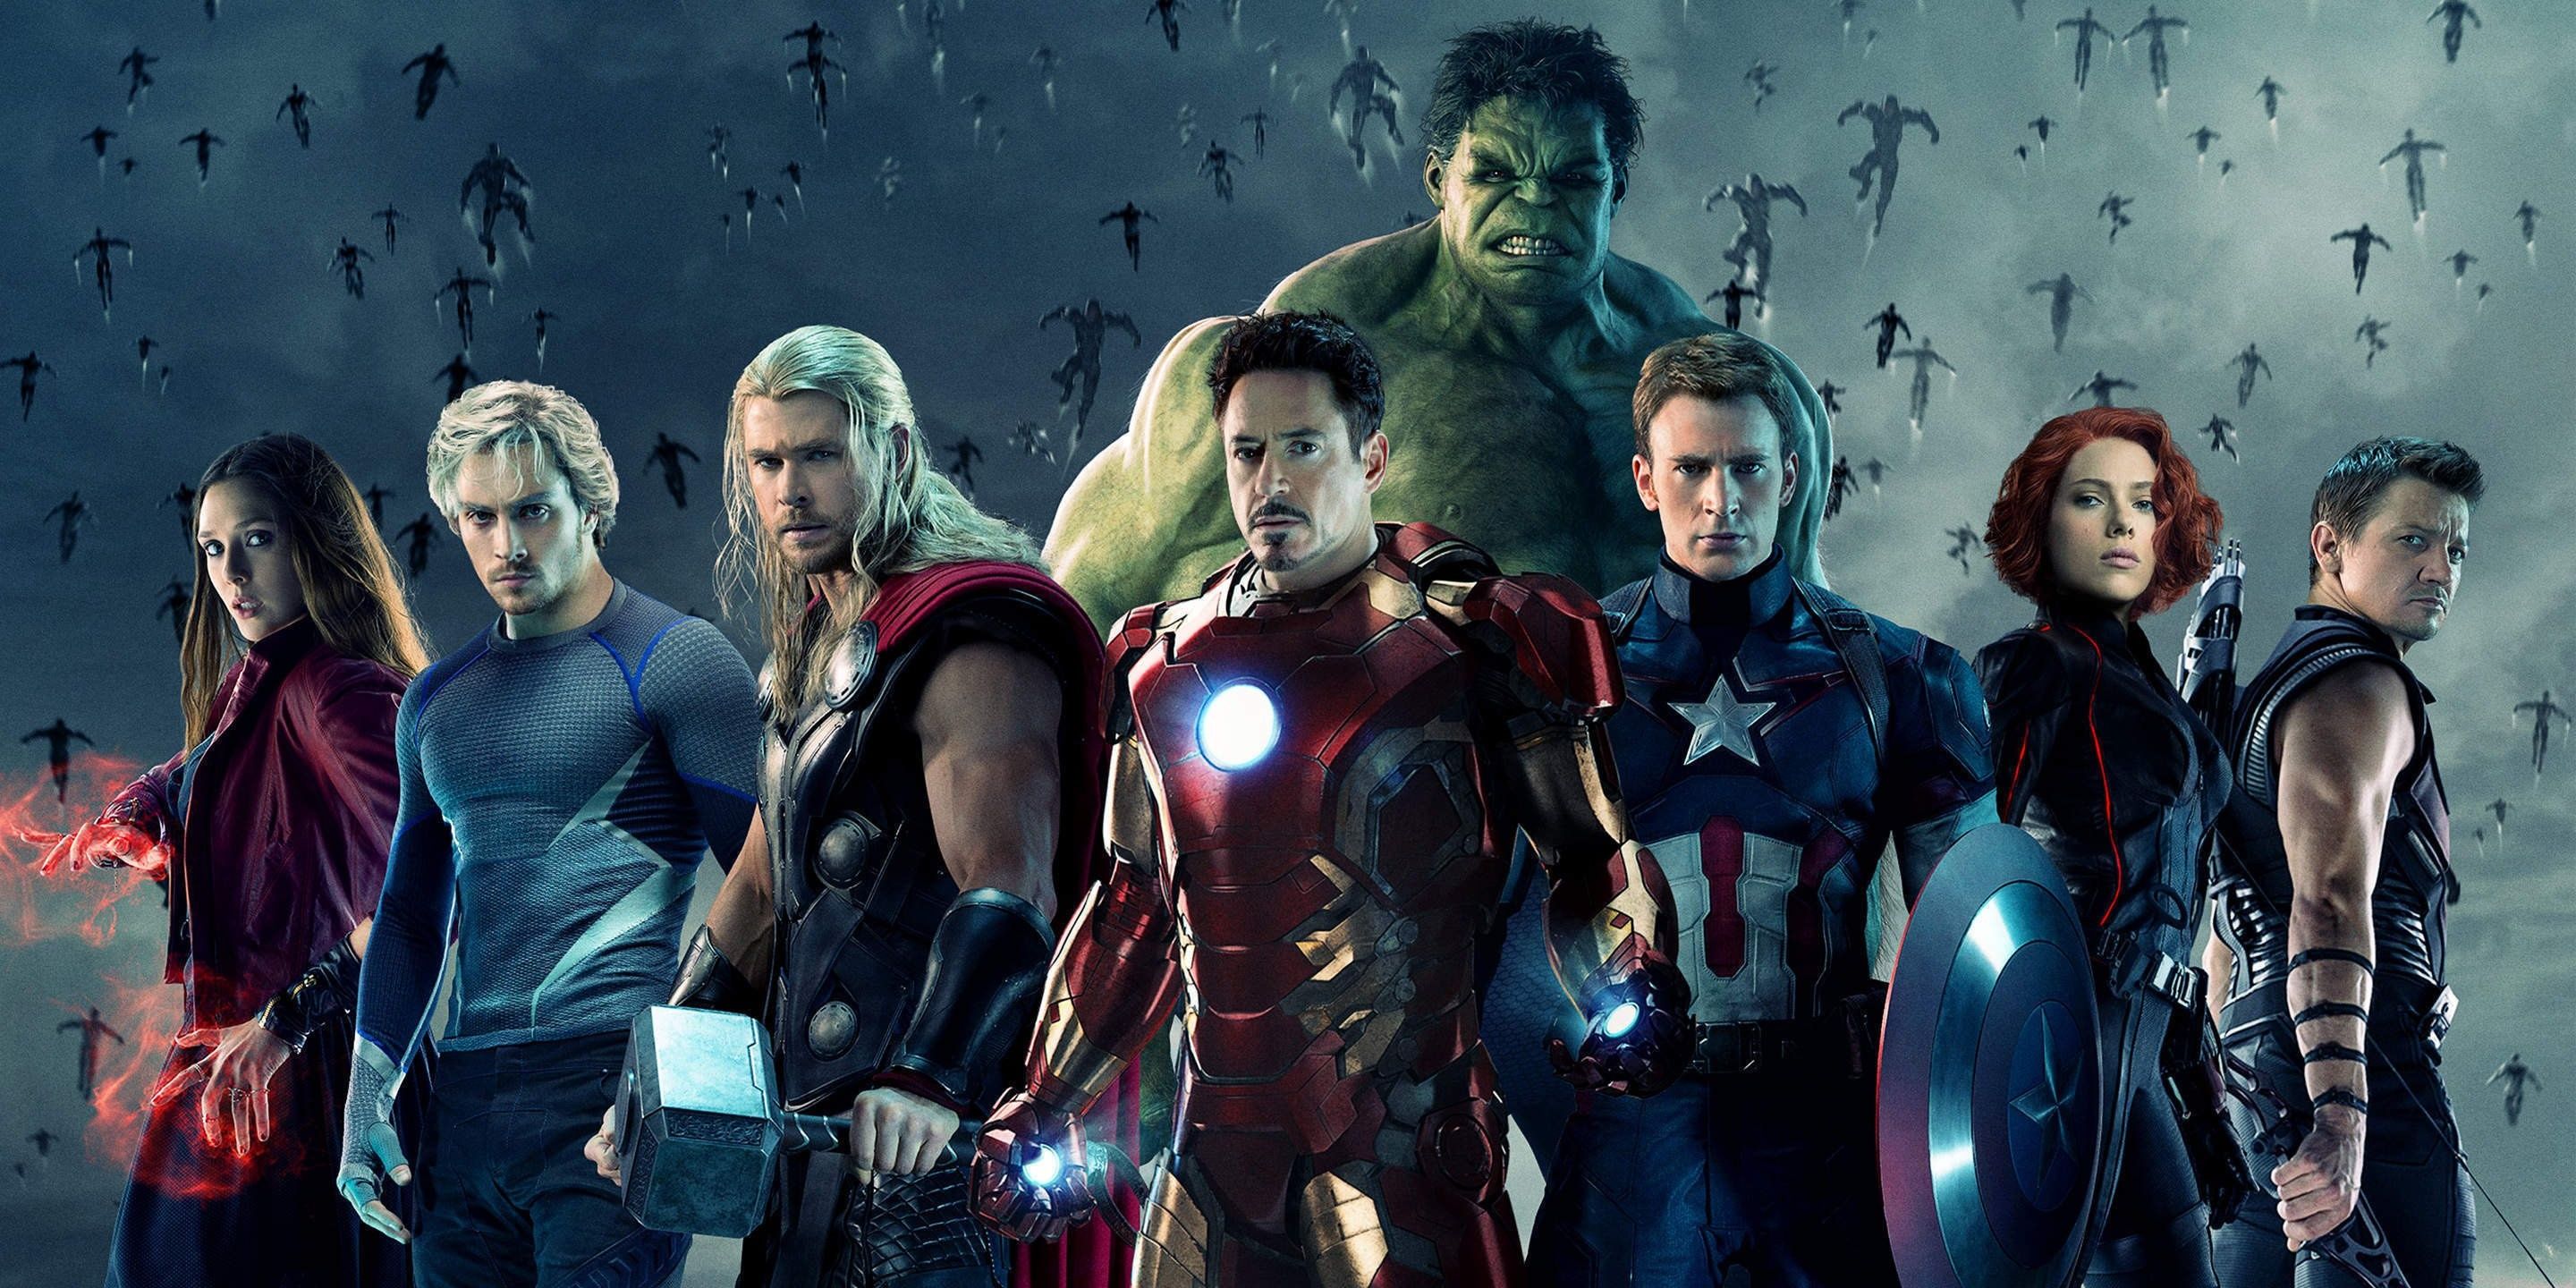 The 10 HighestGrossing Superhero Films Of All Time (According To Box Office Mojo)